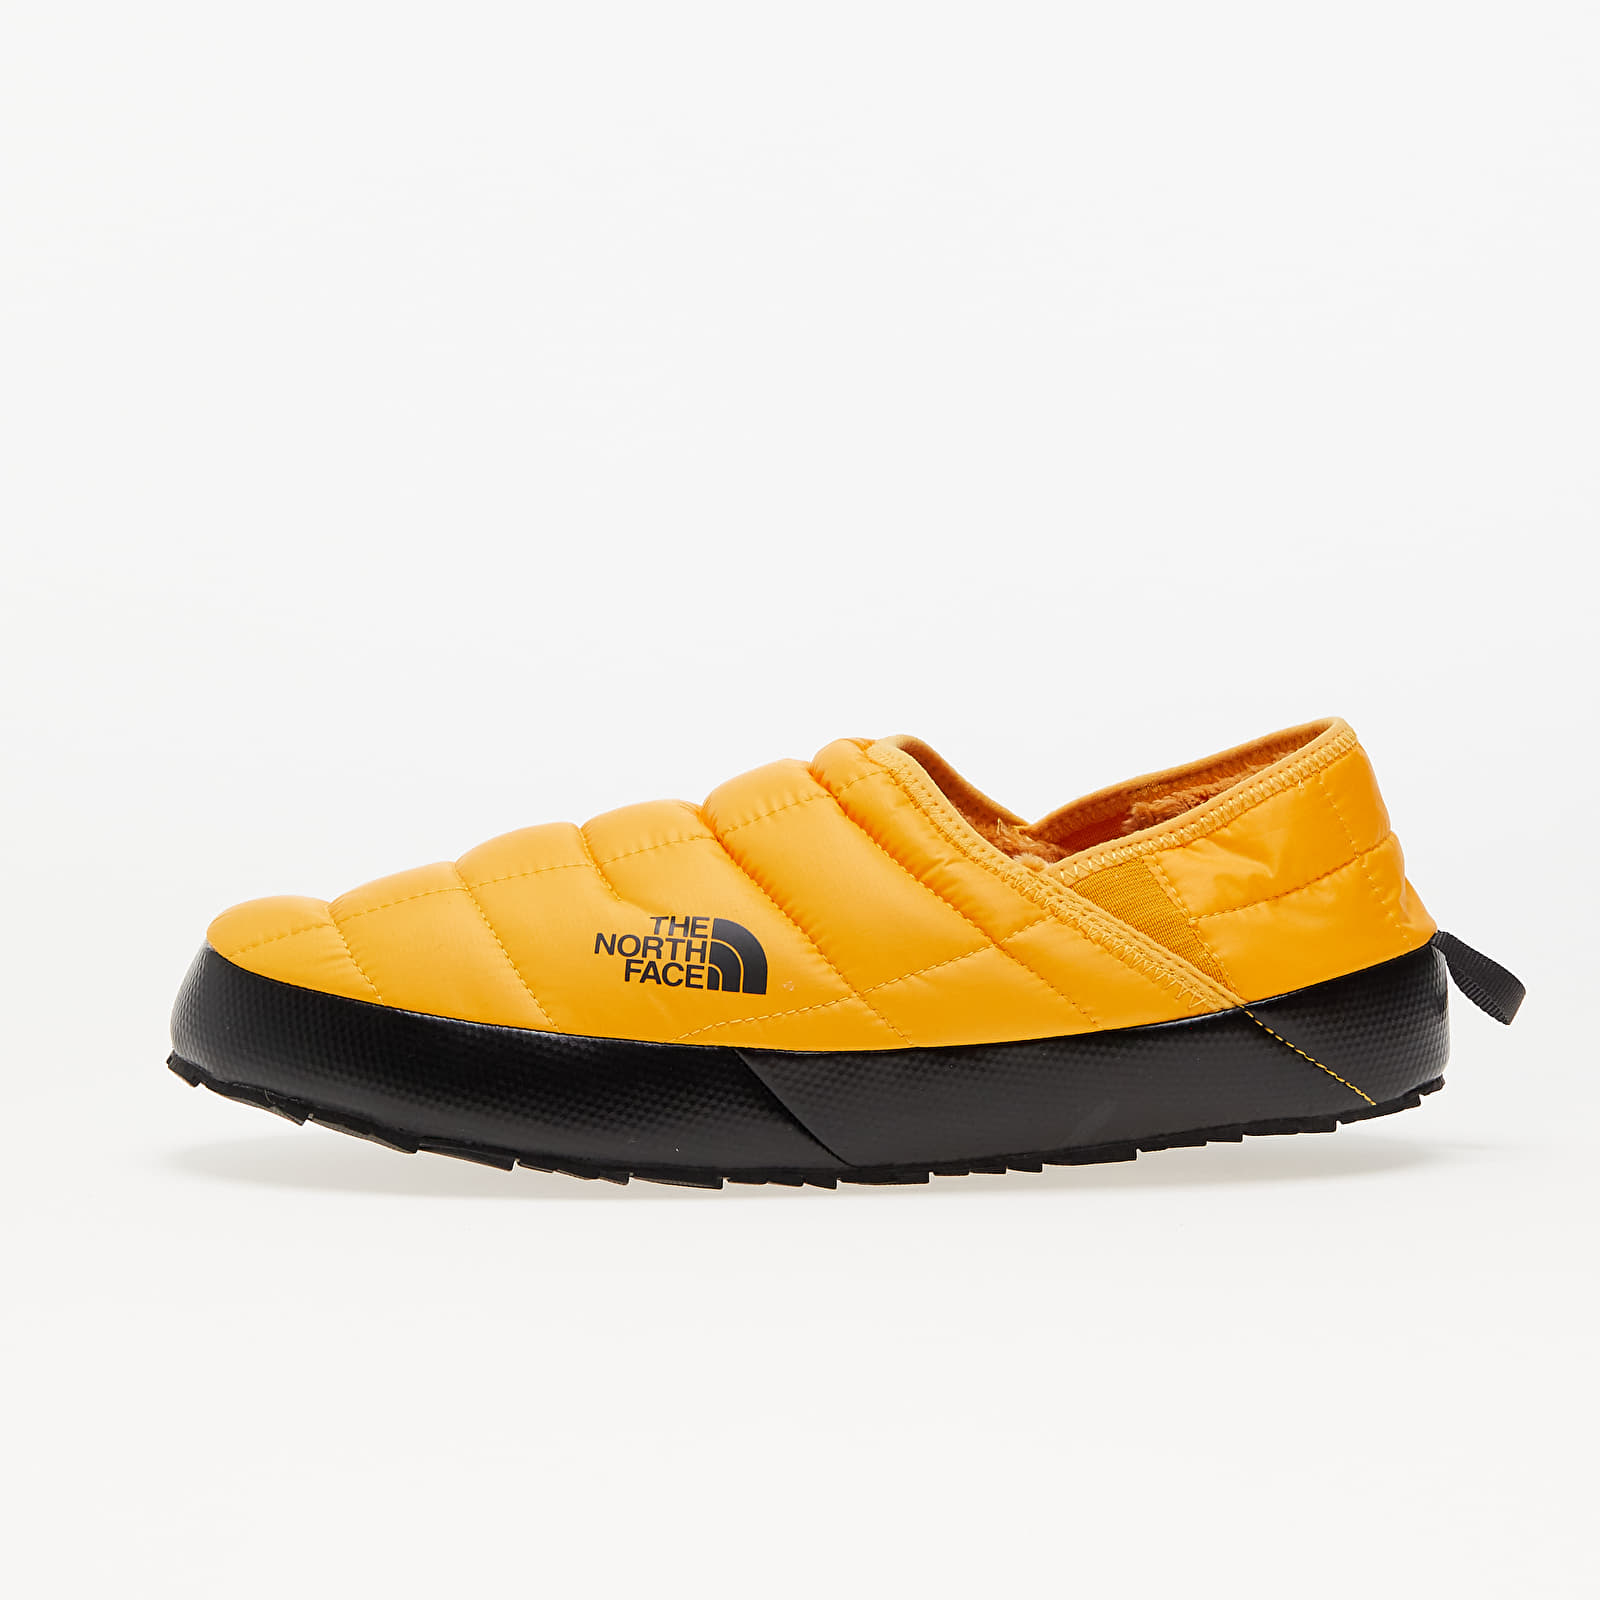 Pánské tenisky a boty The North Face Men's Thermoball Traction Mule V Summit Gold/ Tnf Black